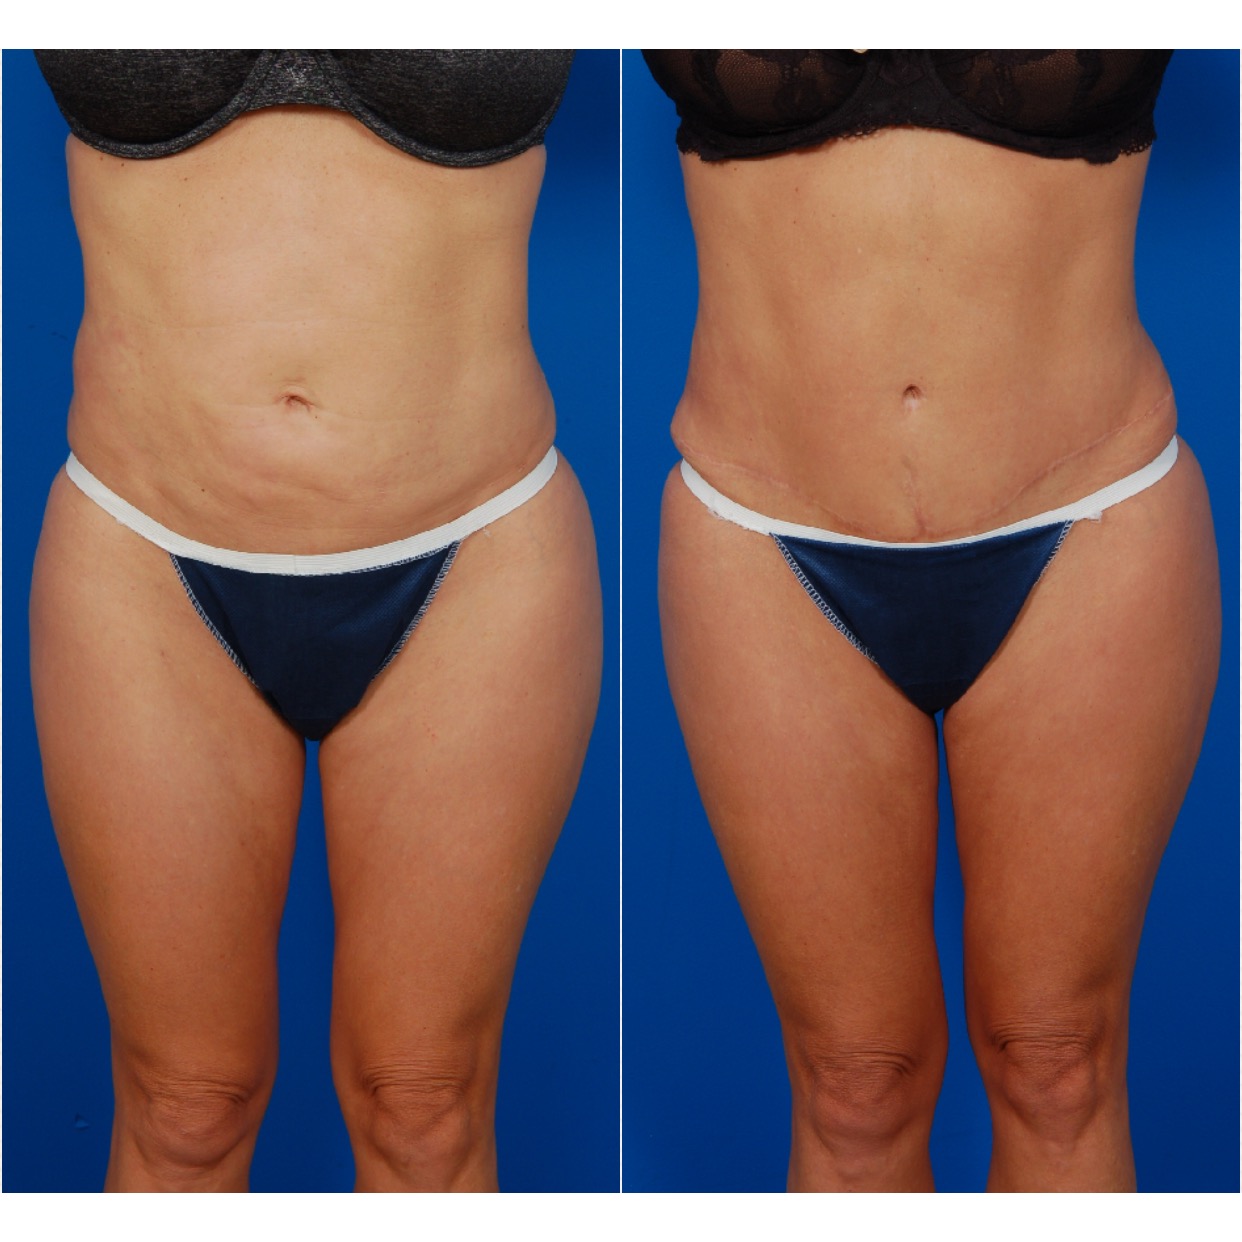 Woman's body, before and after liposuction revision surgery, front view